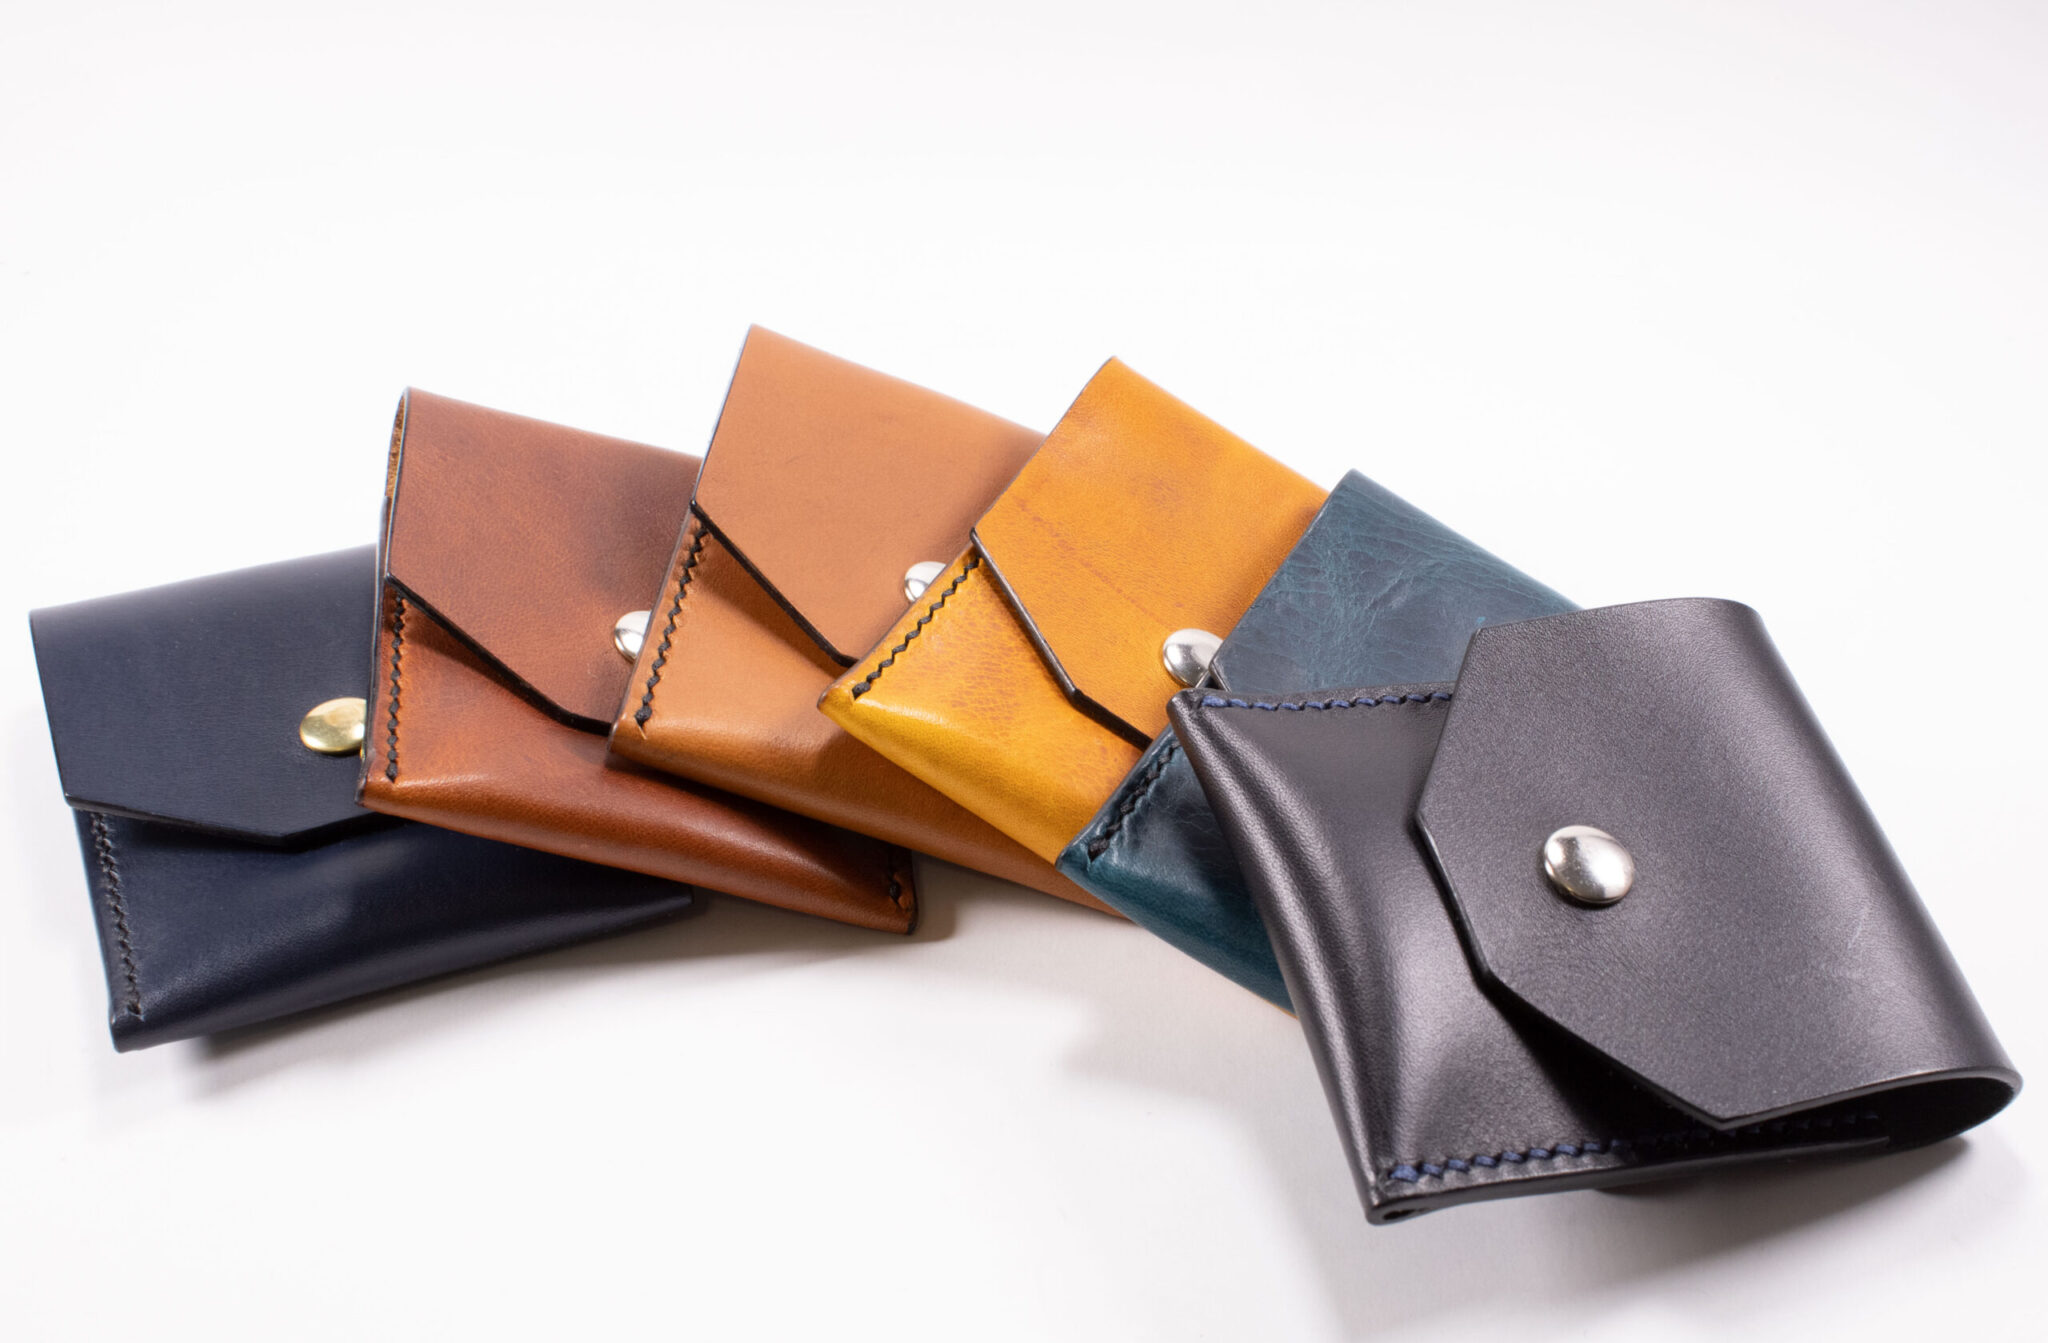 Product image of FredFloris leather card wallet